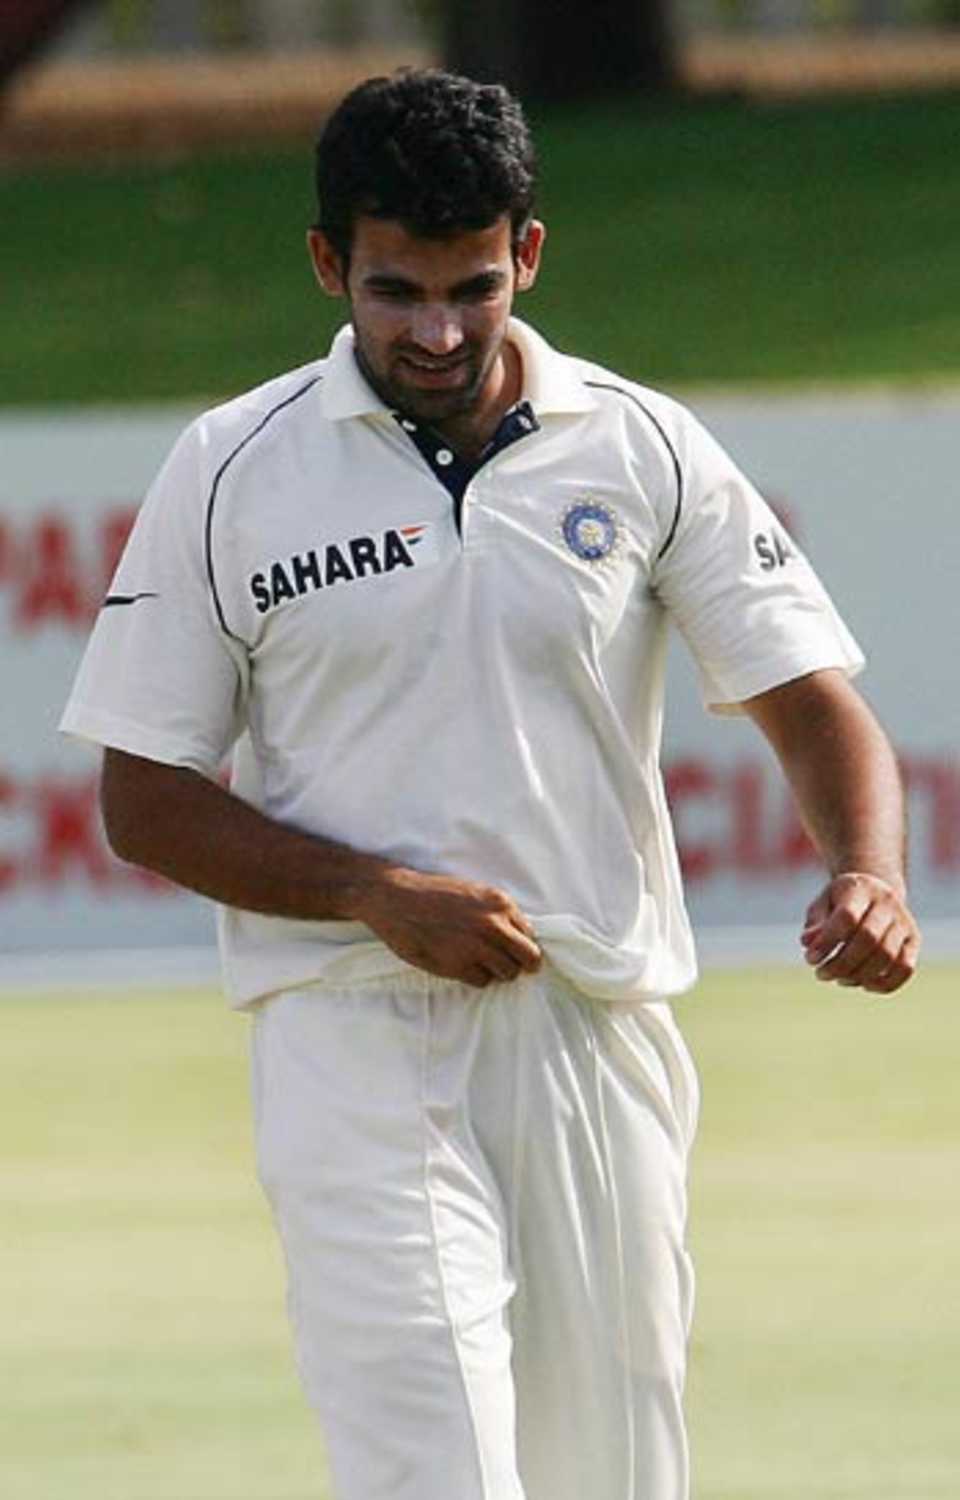 Zaheer Khan worked hard and the results came as the Indians beat Rest of South Africa